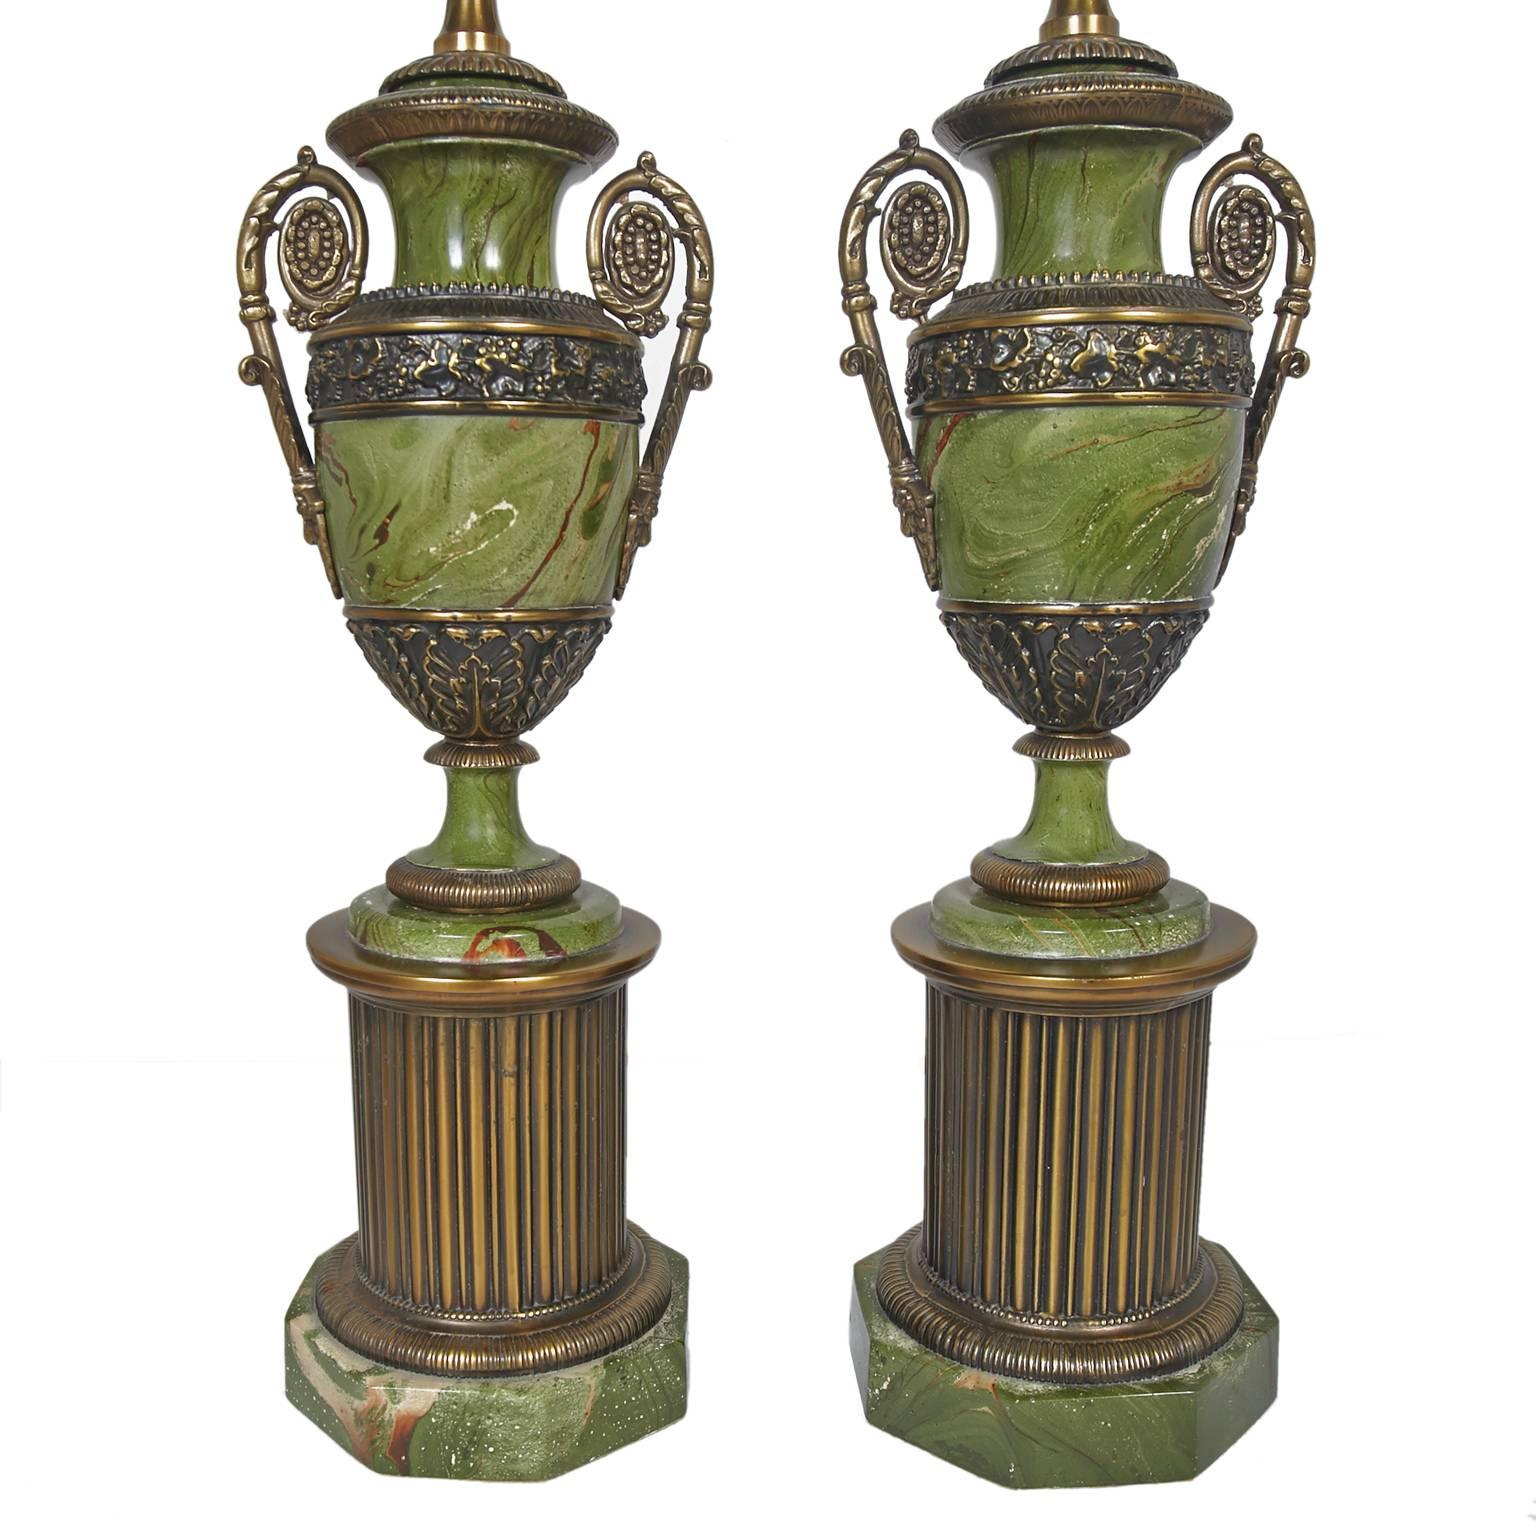 Neoclassical Pair of Paul Hanson Faux Malachite Table Lamps with Original Shades and Finials